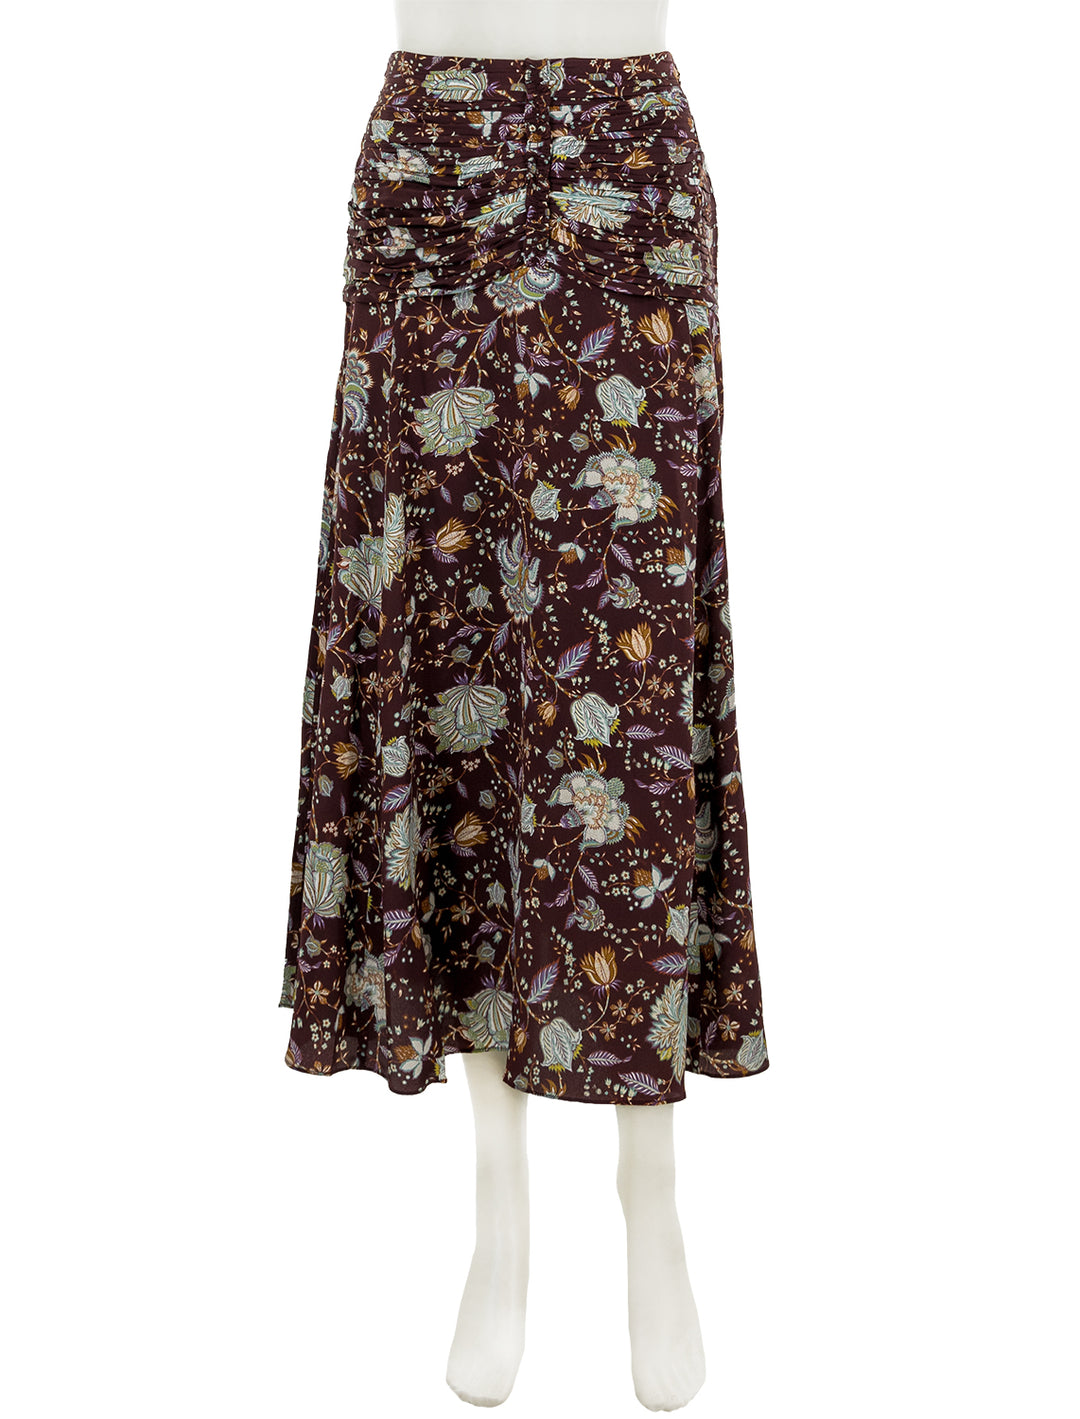 Front view of Ulla Johnson's imani skirt in heliotrope.